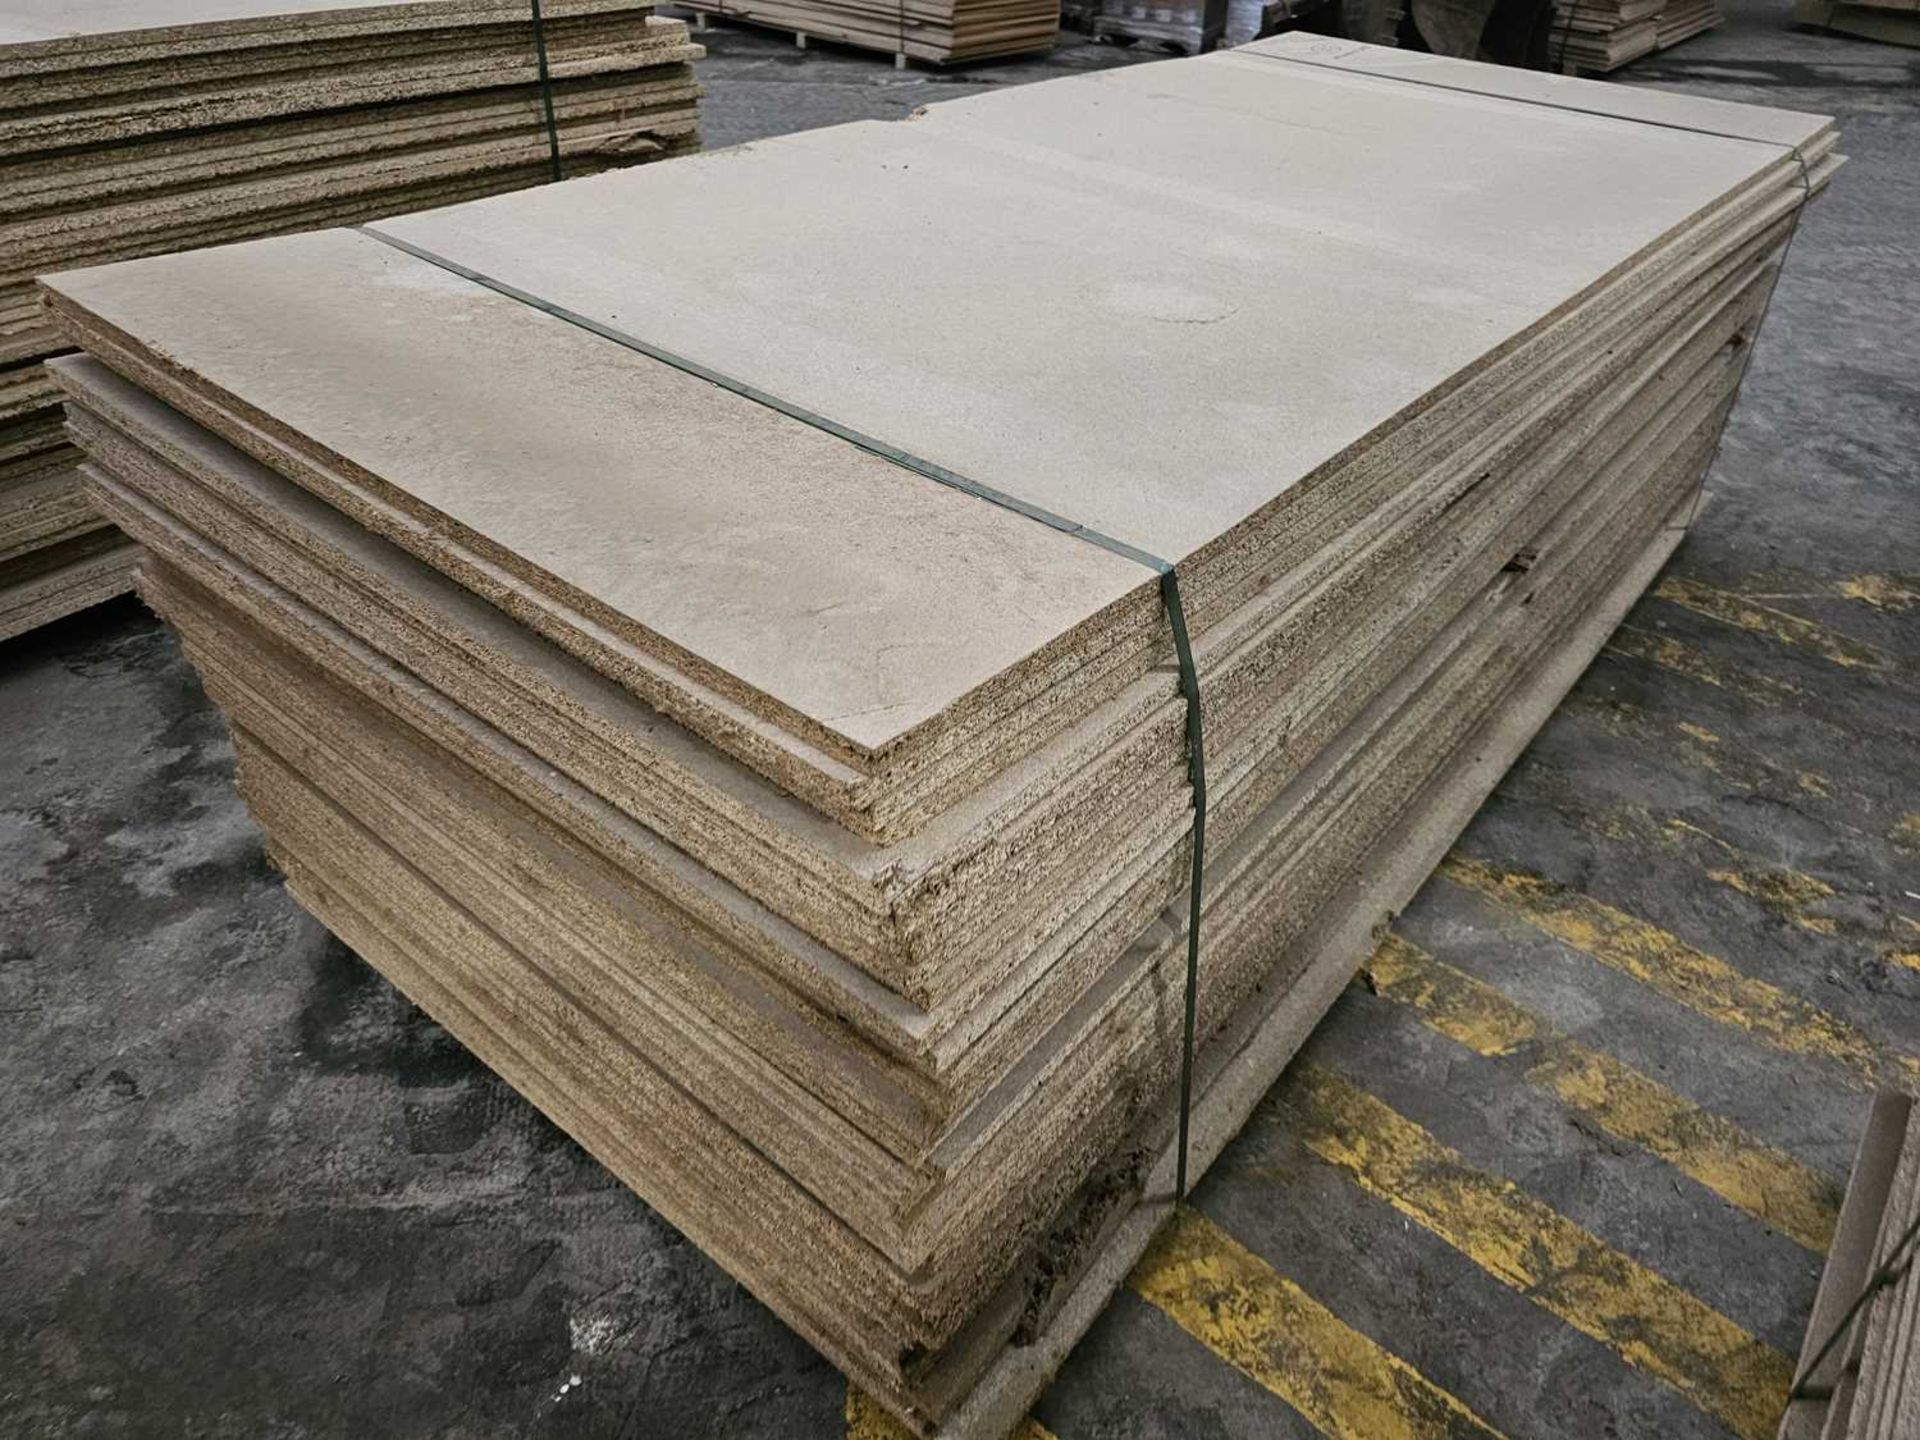 Selection of Chip Board Sheets (245cm x 104cm x 20mm - 37 of) - Image 2 of 2